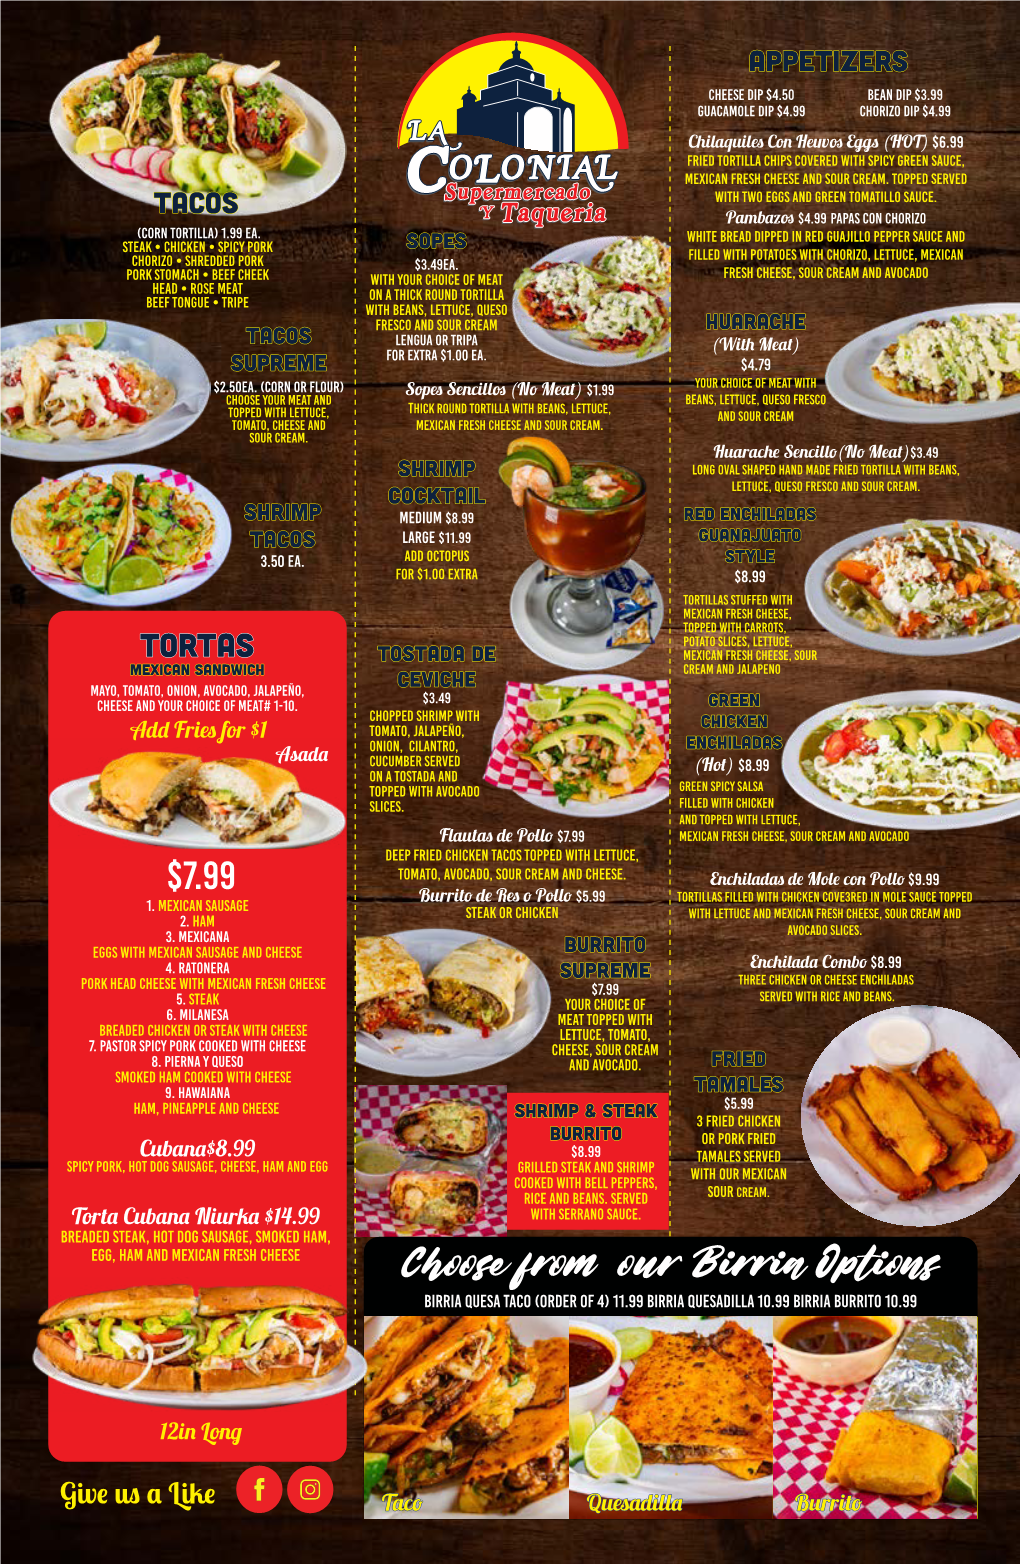 Choose from Our Birria Options